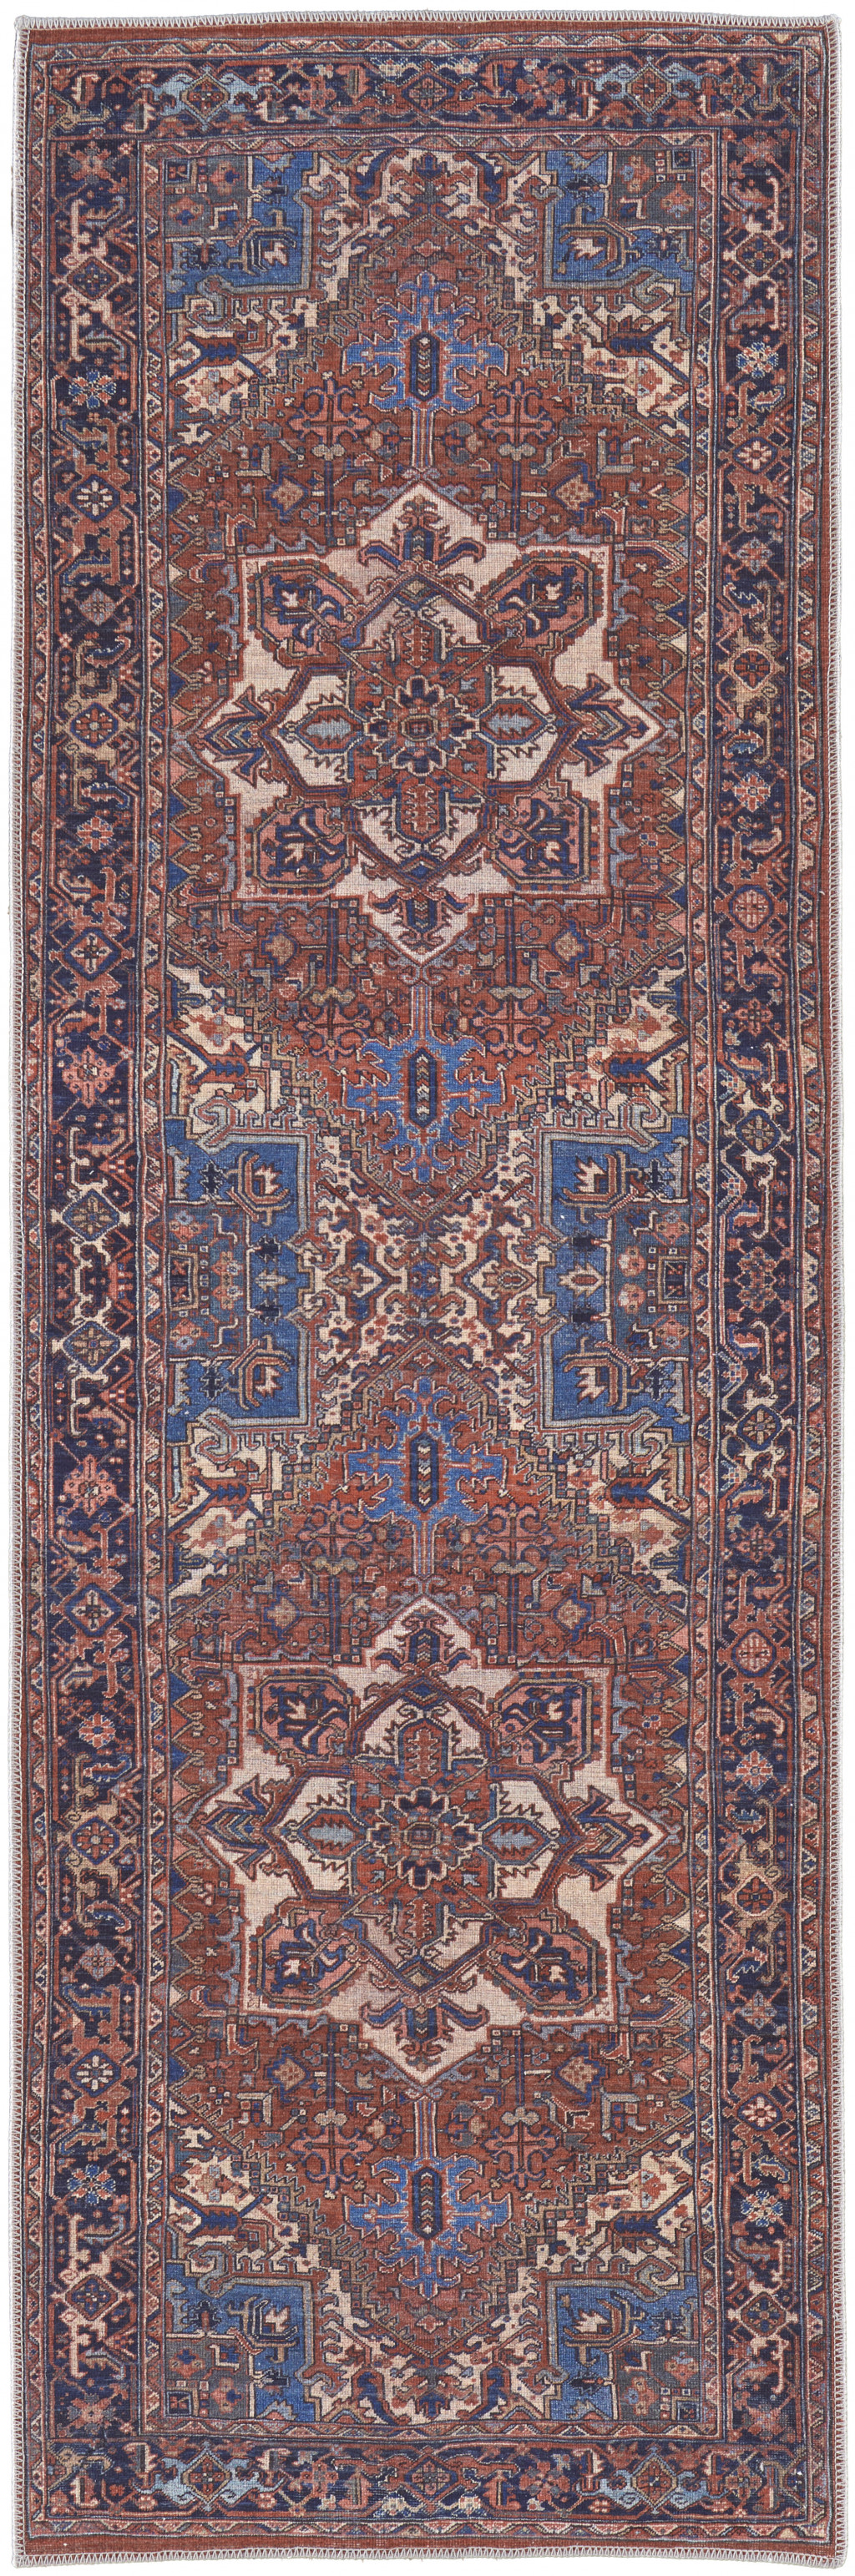 8' Red Tan And Blue Floral Power Loom Runner Rug-515117-1